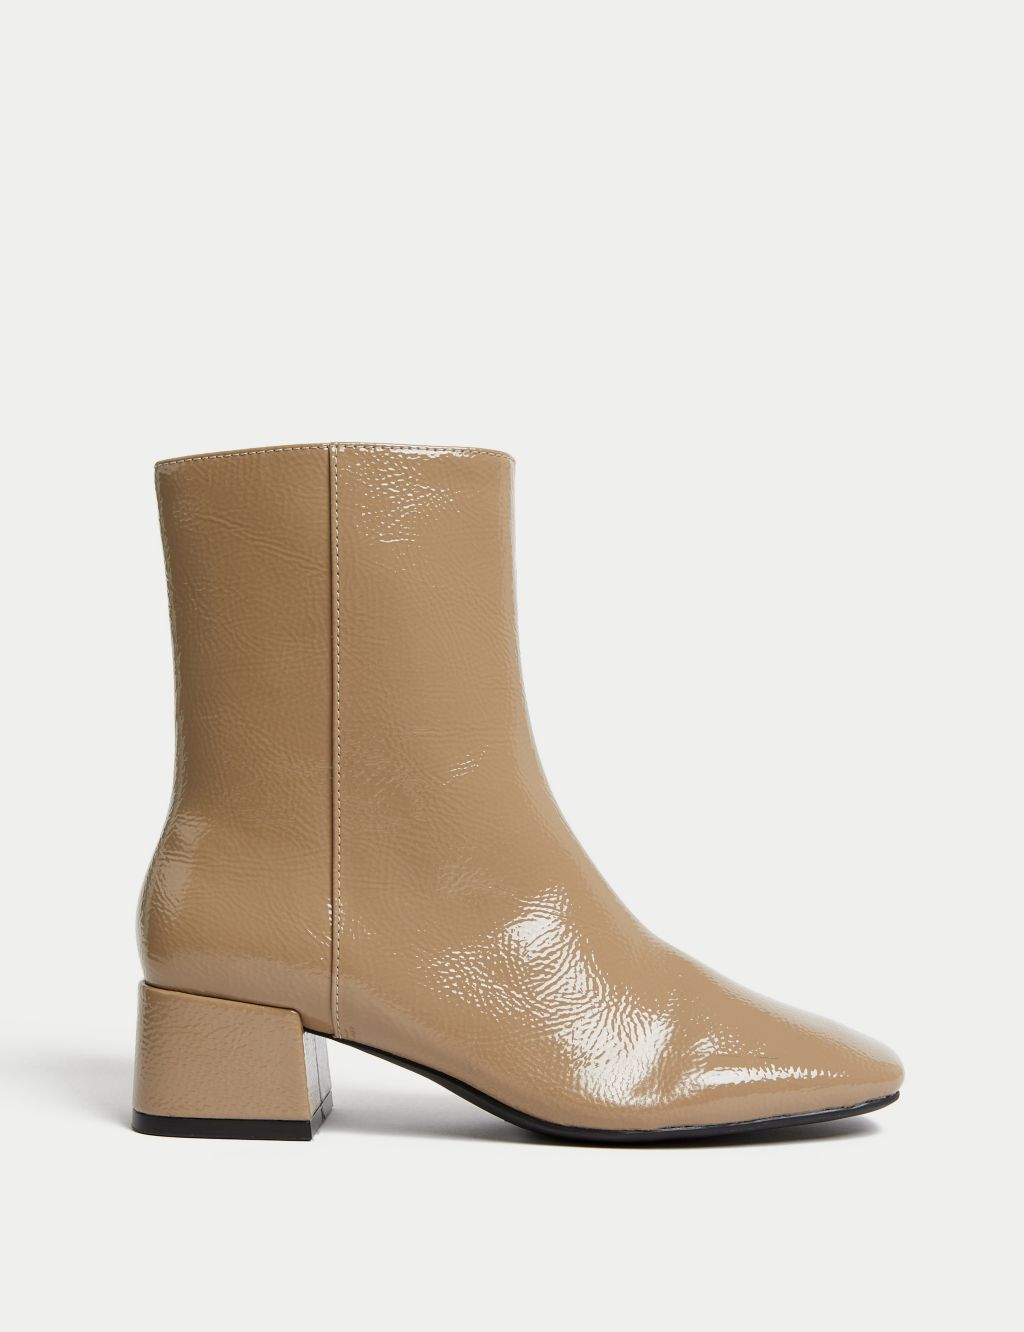 Block Heel Ankle Boots image 1